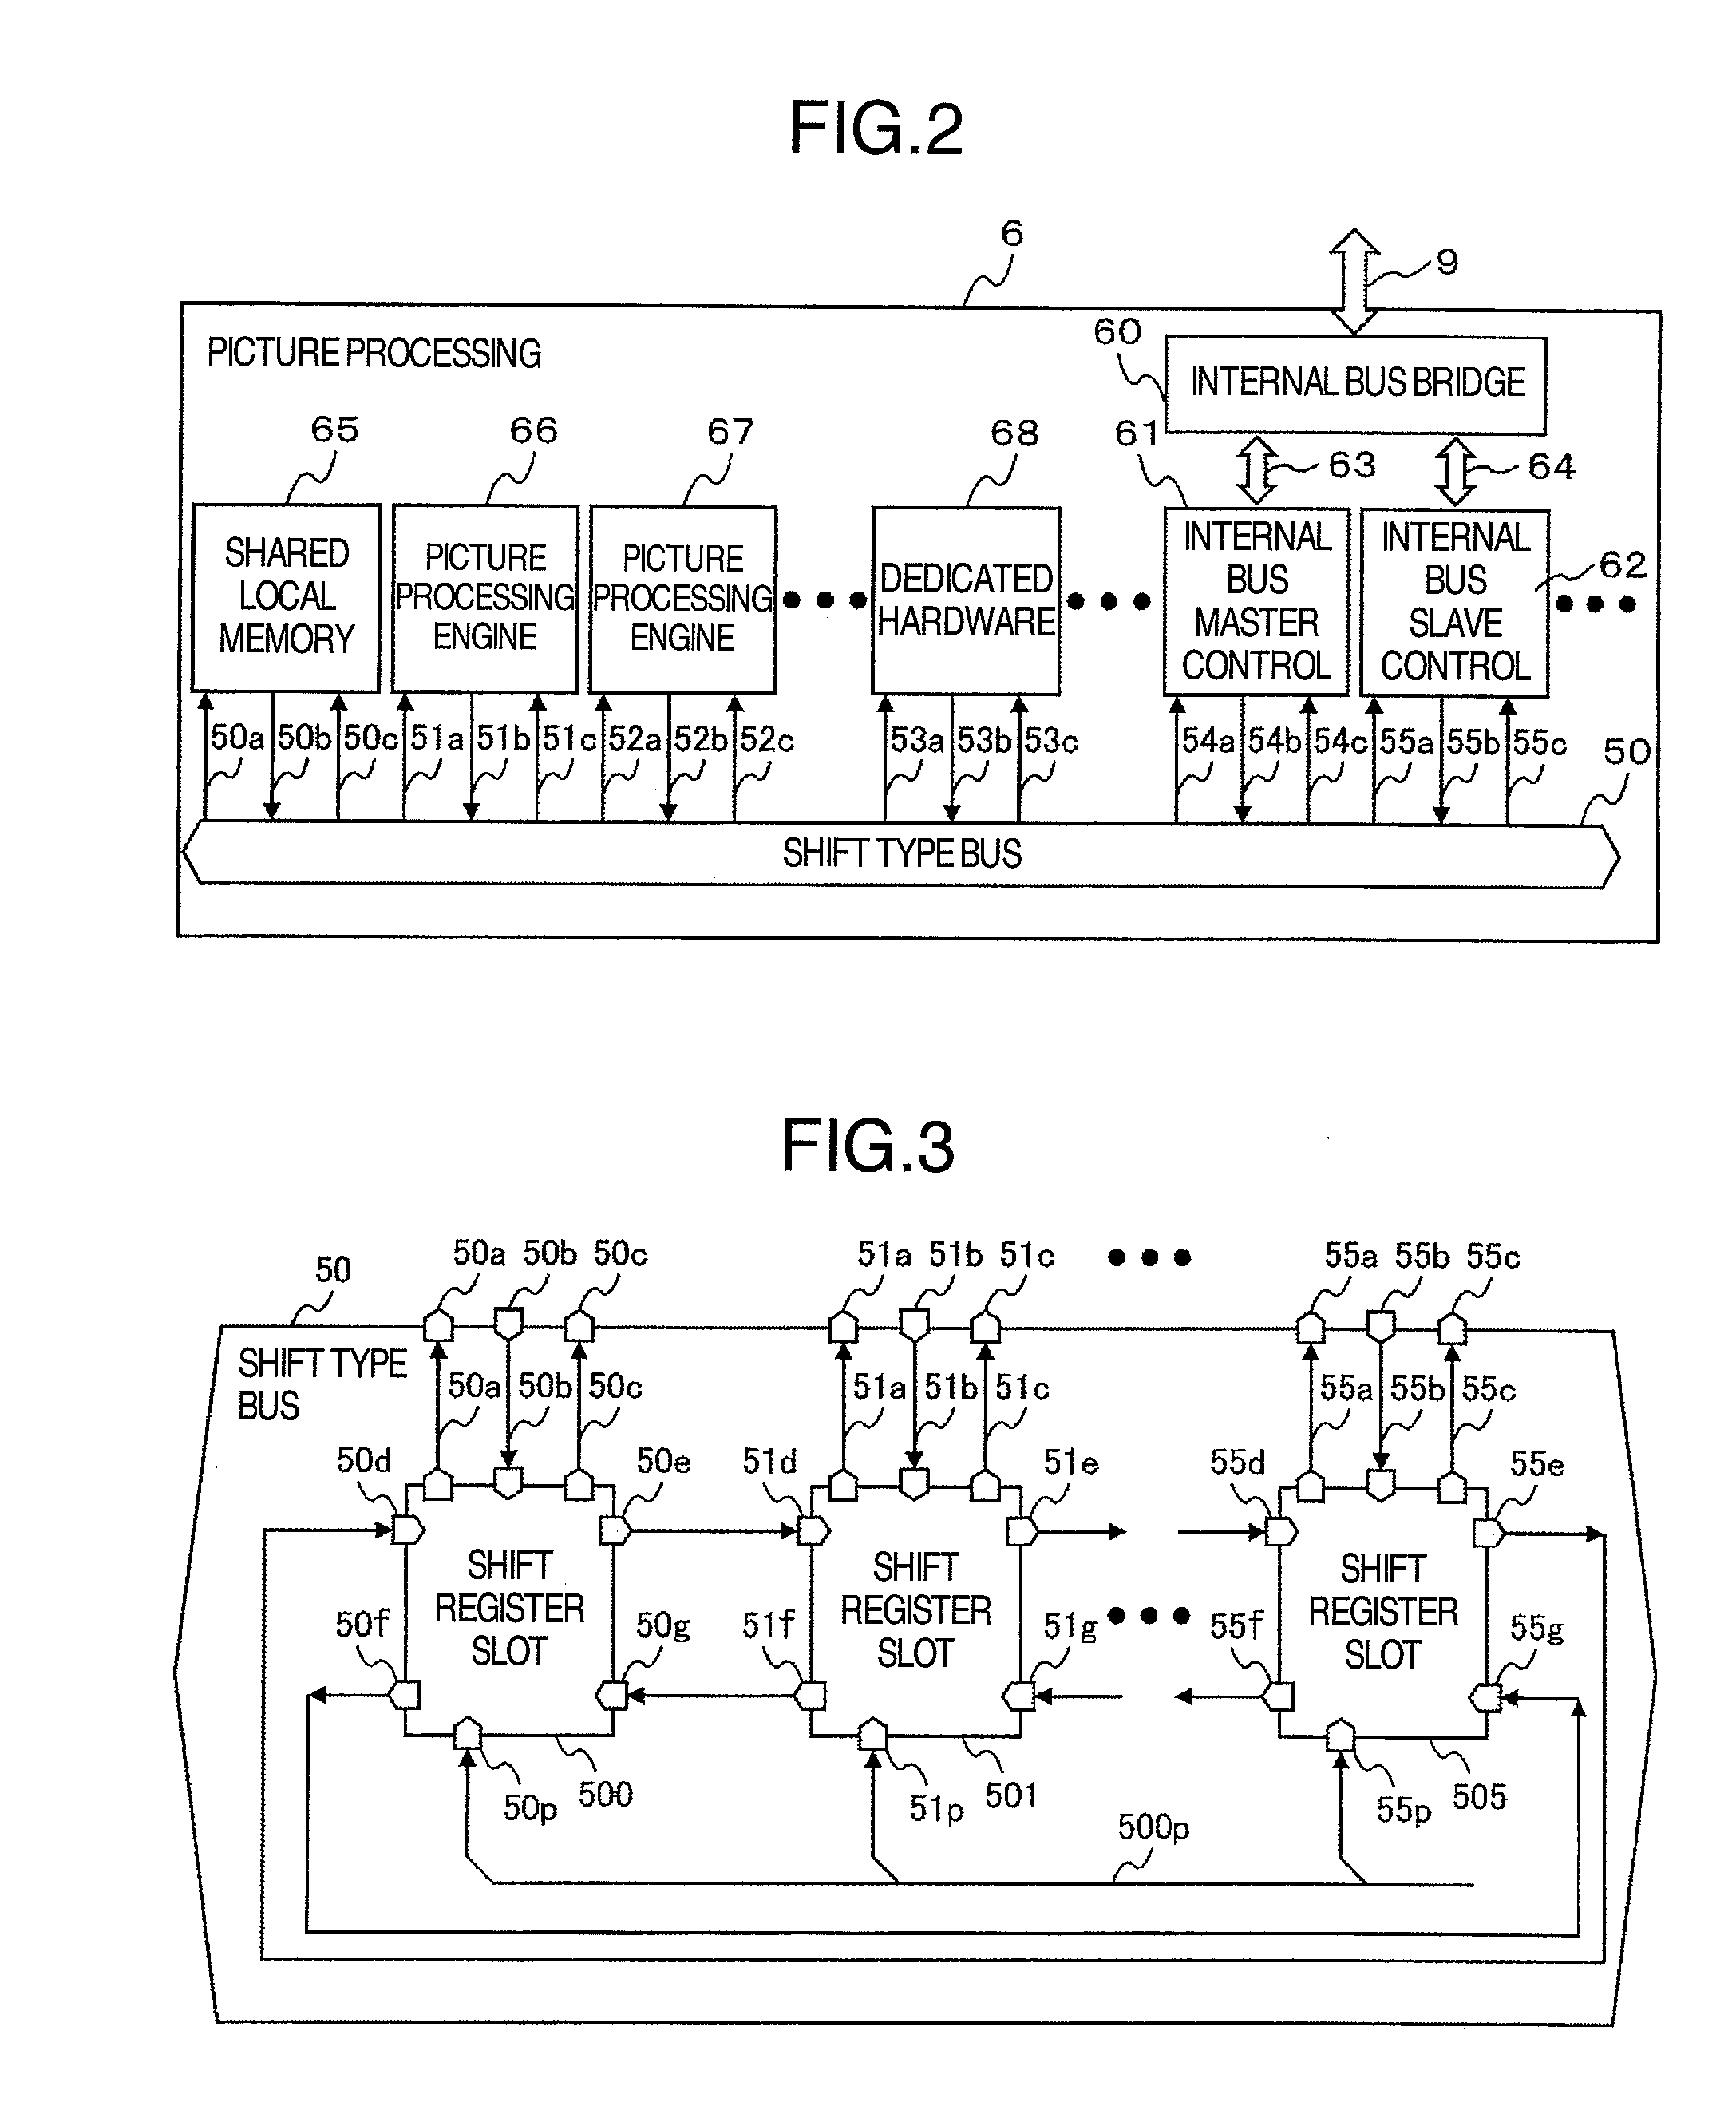 Picture Processing Engine and Picture Processing System